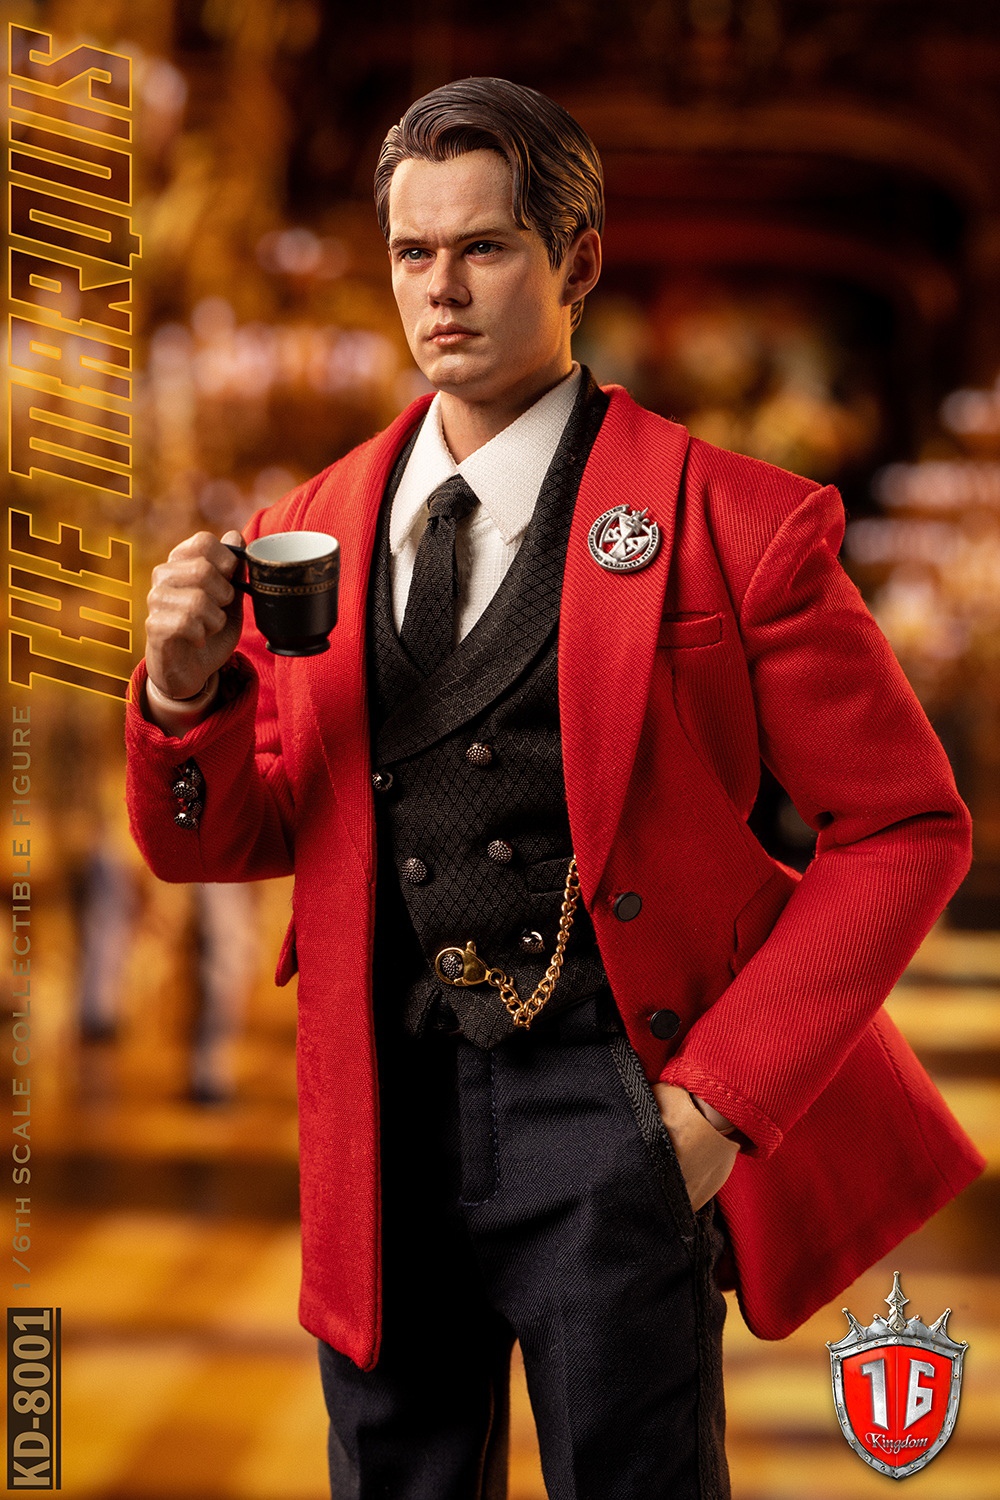 newproduct - NEW PRODUCT: Kingdom: 1/6 The Marquis Action Figure KD-8001 11401010